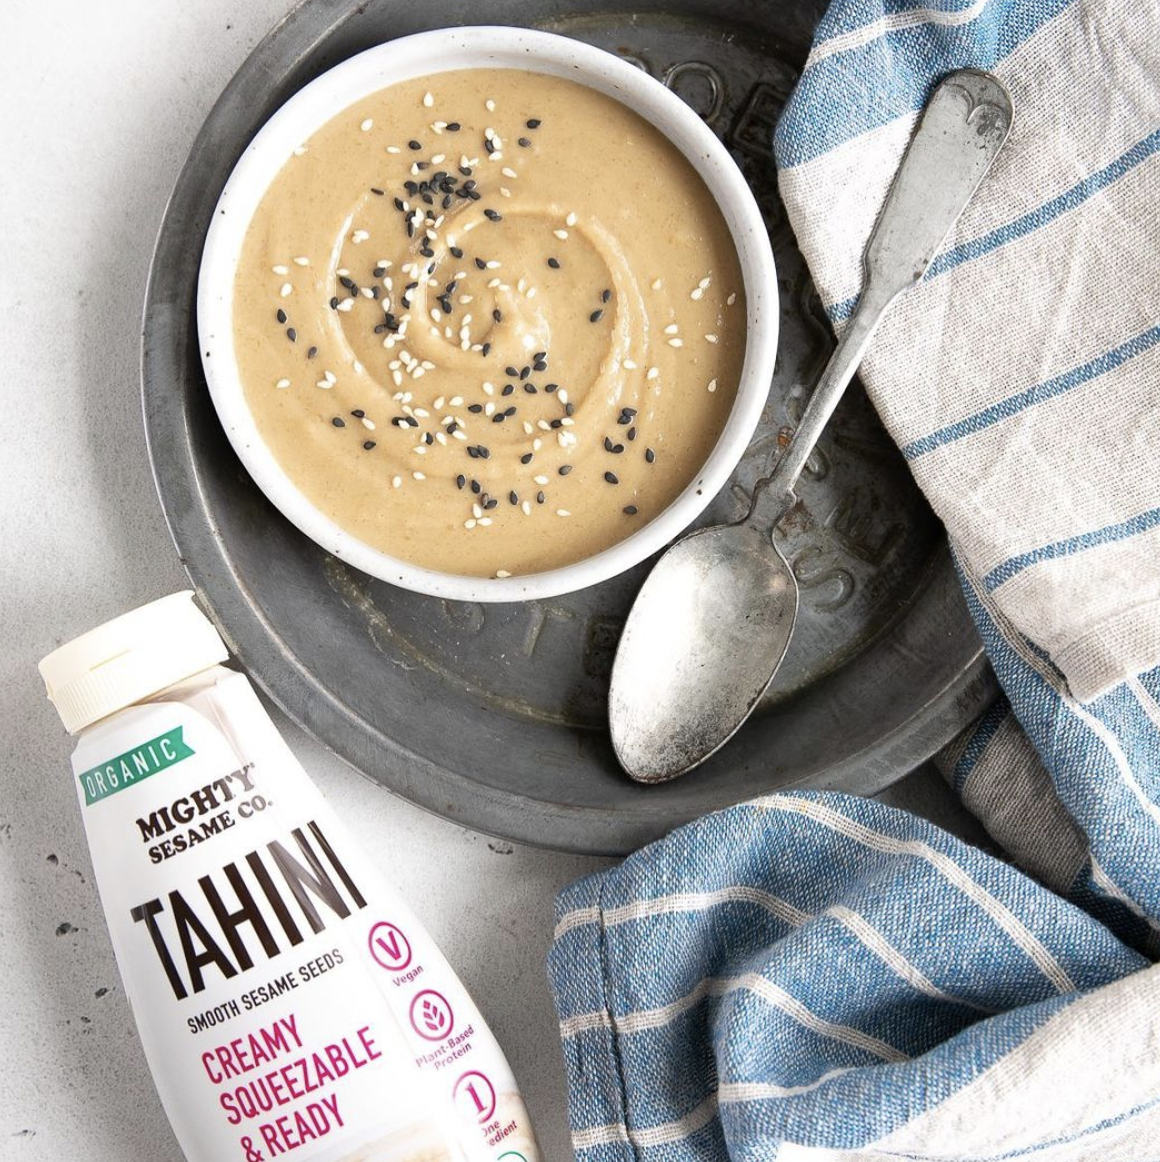 Organic Tahini in Squeeze Bottle - Mighty Sesame